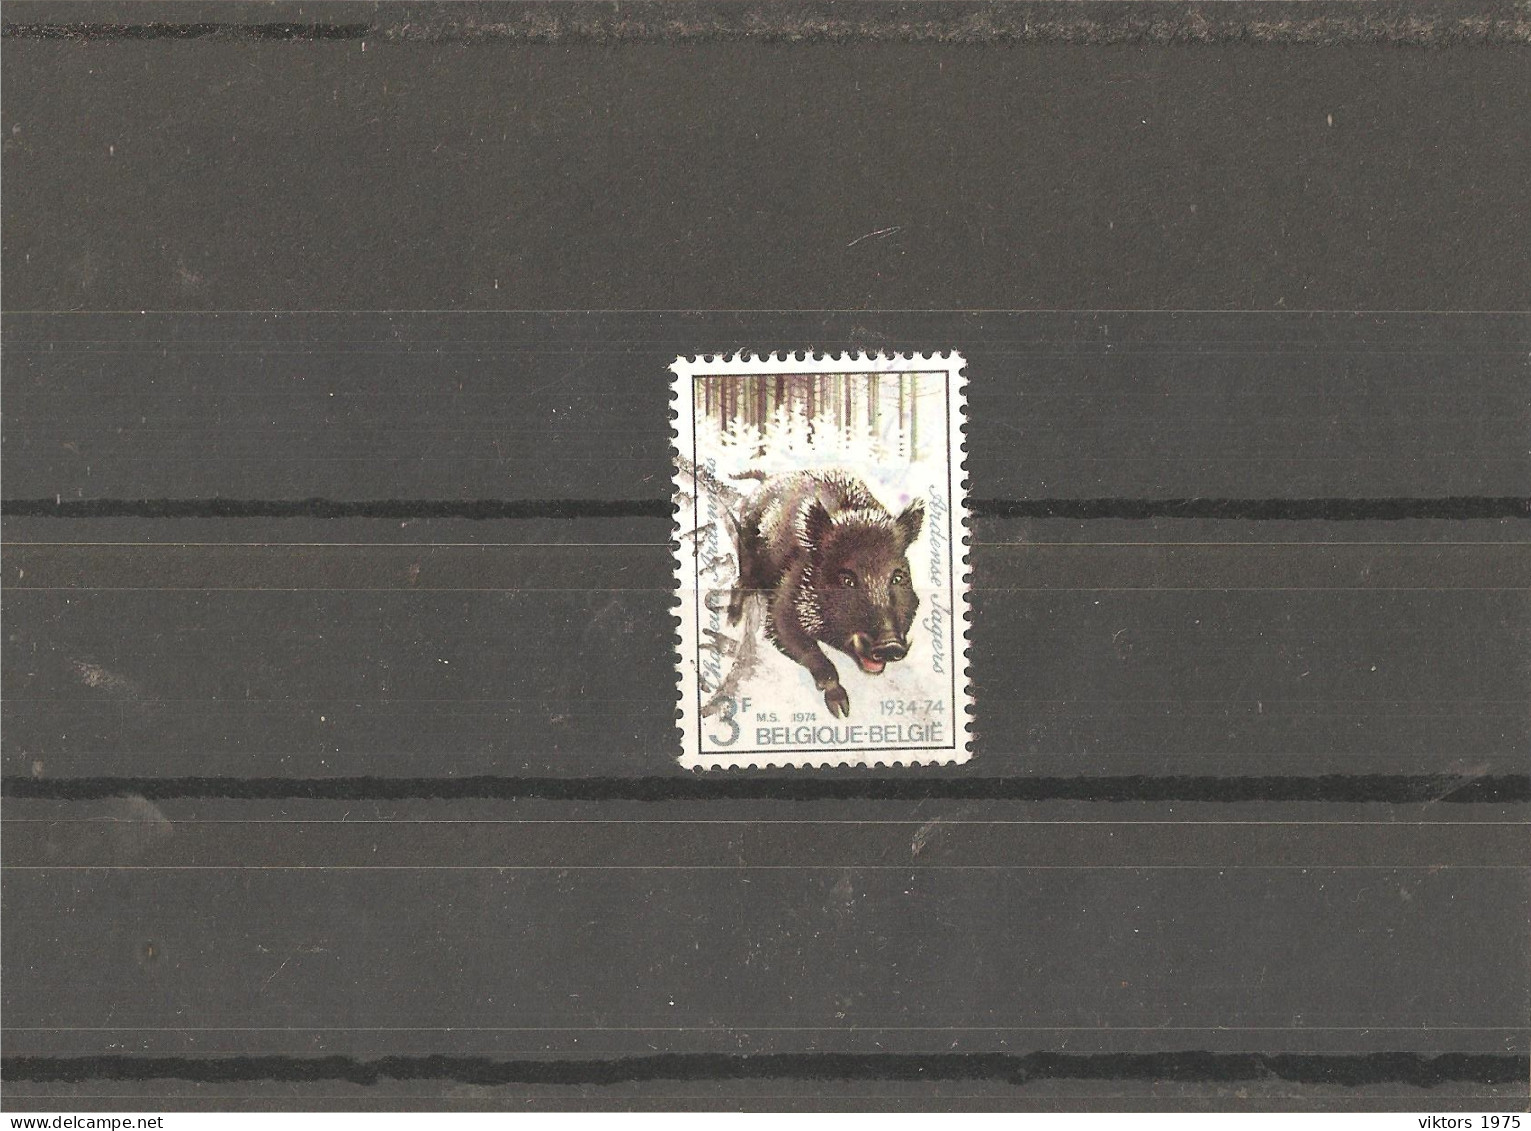 Used Stamp Nr.1785 In MICHEL Catalog - Used Stamps